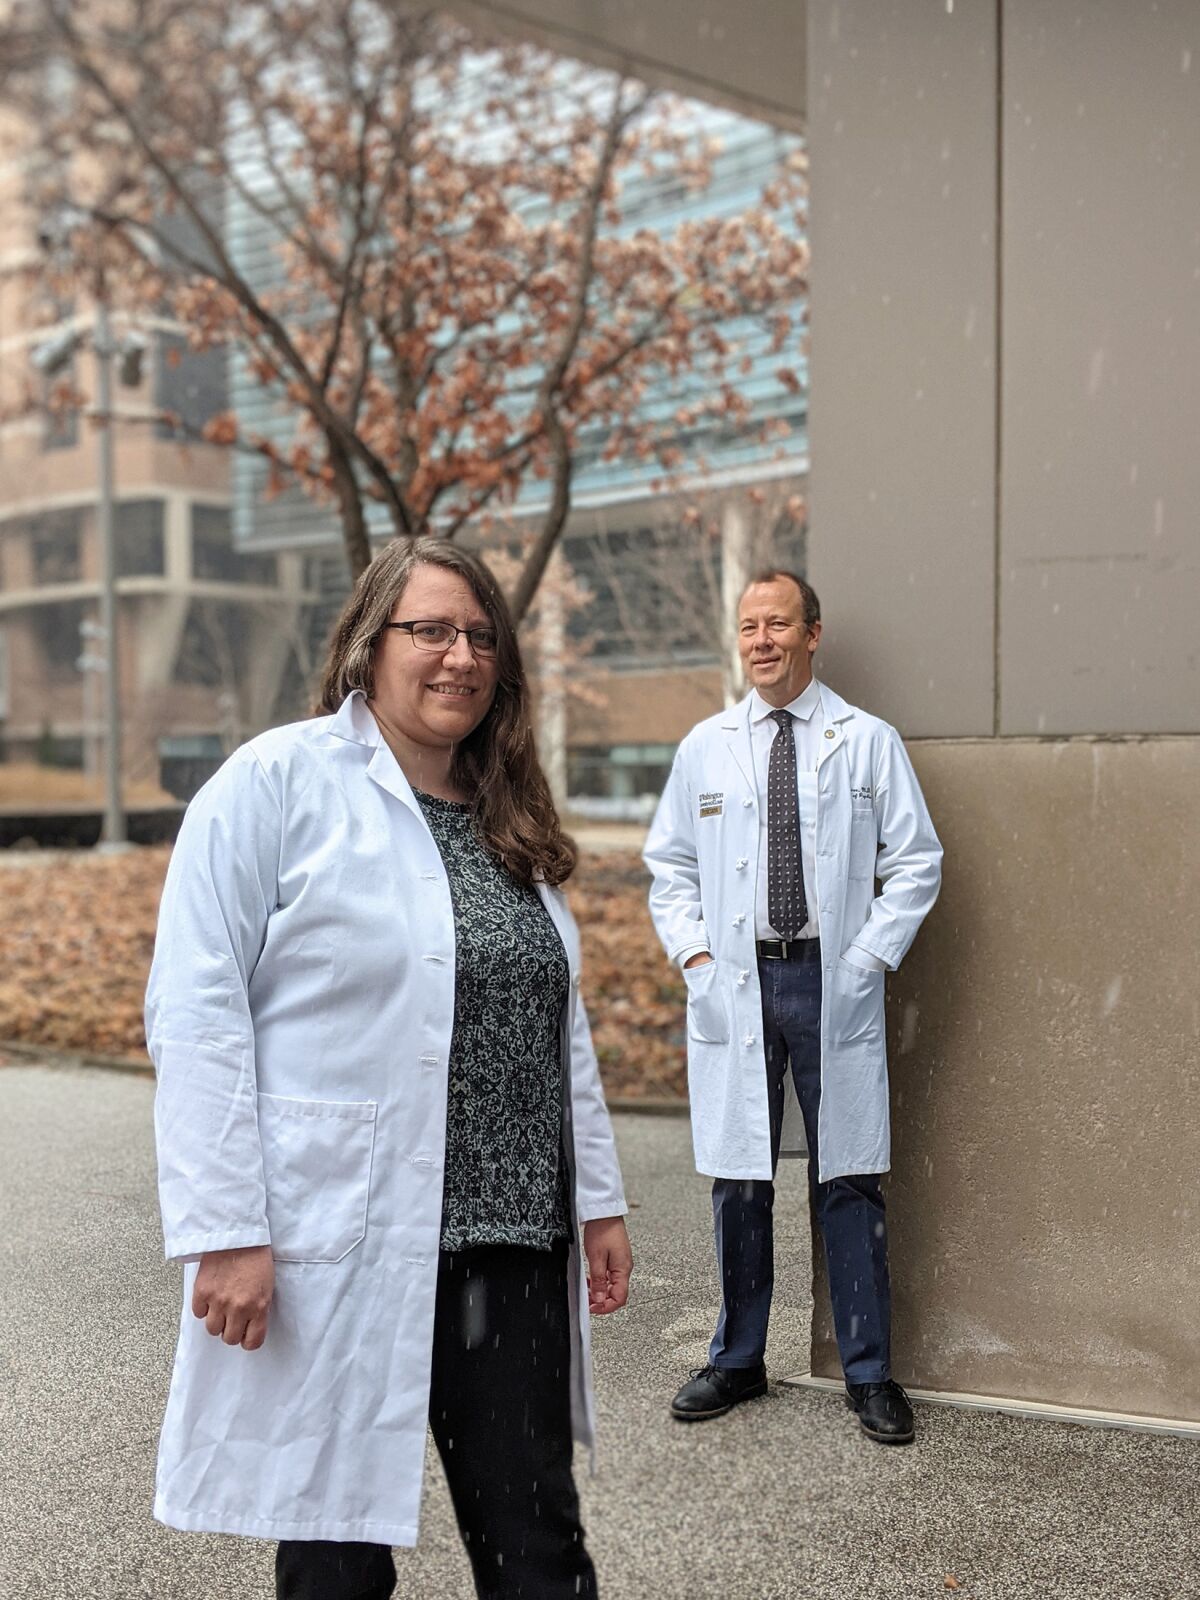 Dr. Angela Reiersen, joined with her colleague at Washington University School of Medicine in St. Louis, Dr. Eric Lenze.